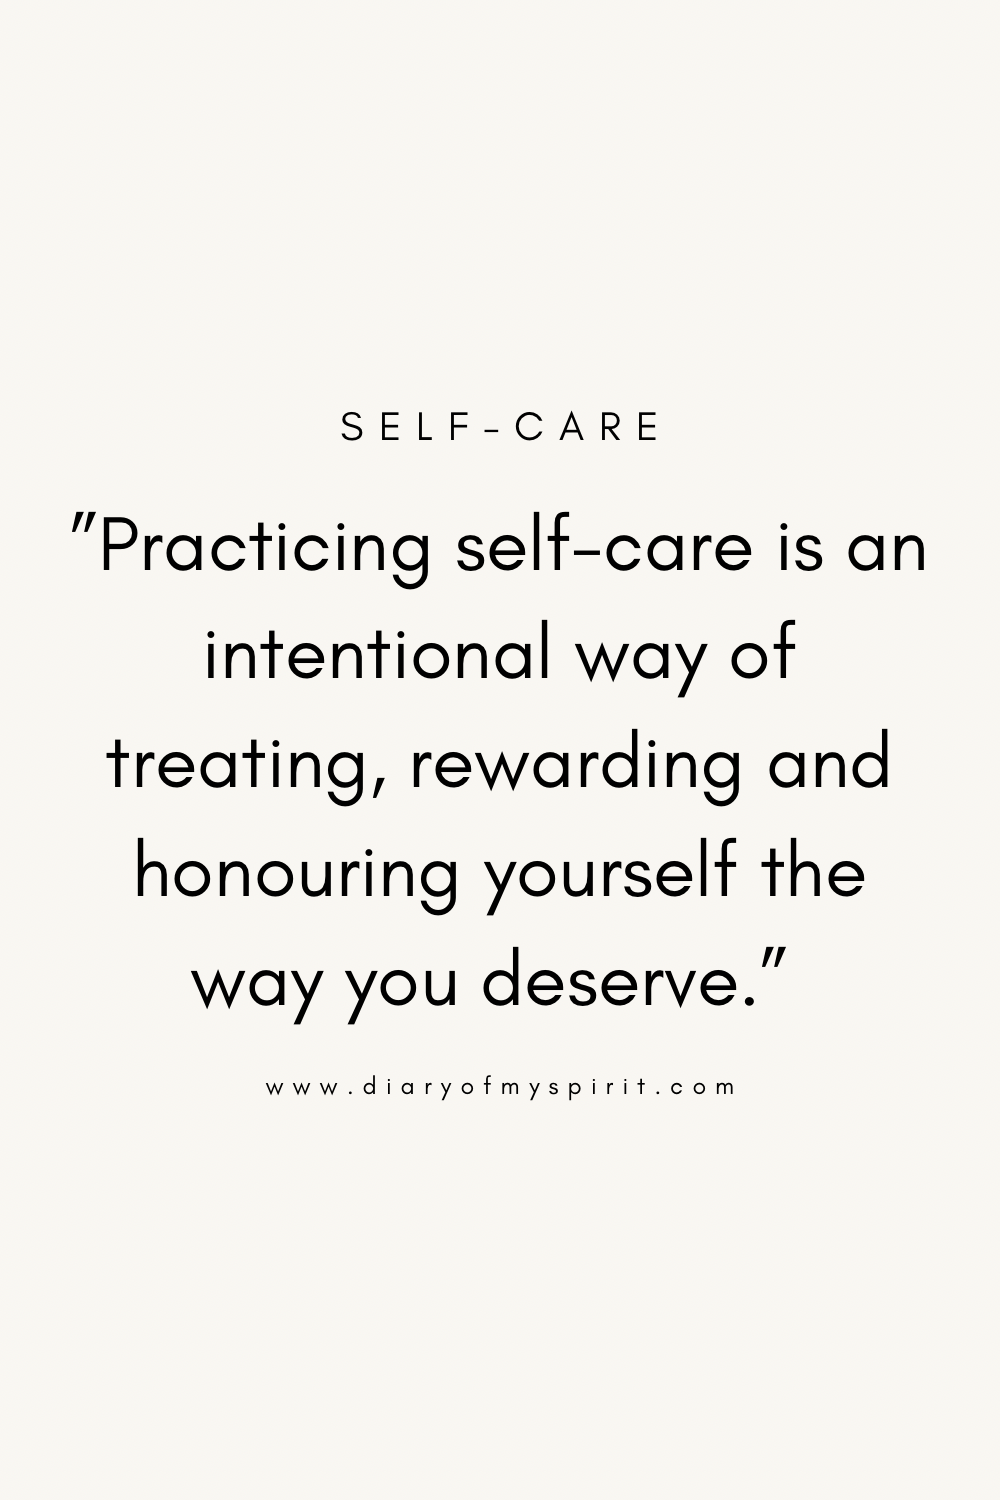 free self care ideas. ideas for self care. self care routine ideas. self care for women. self care is for everyone. how to practice self care. what is self care. self care quotes